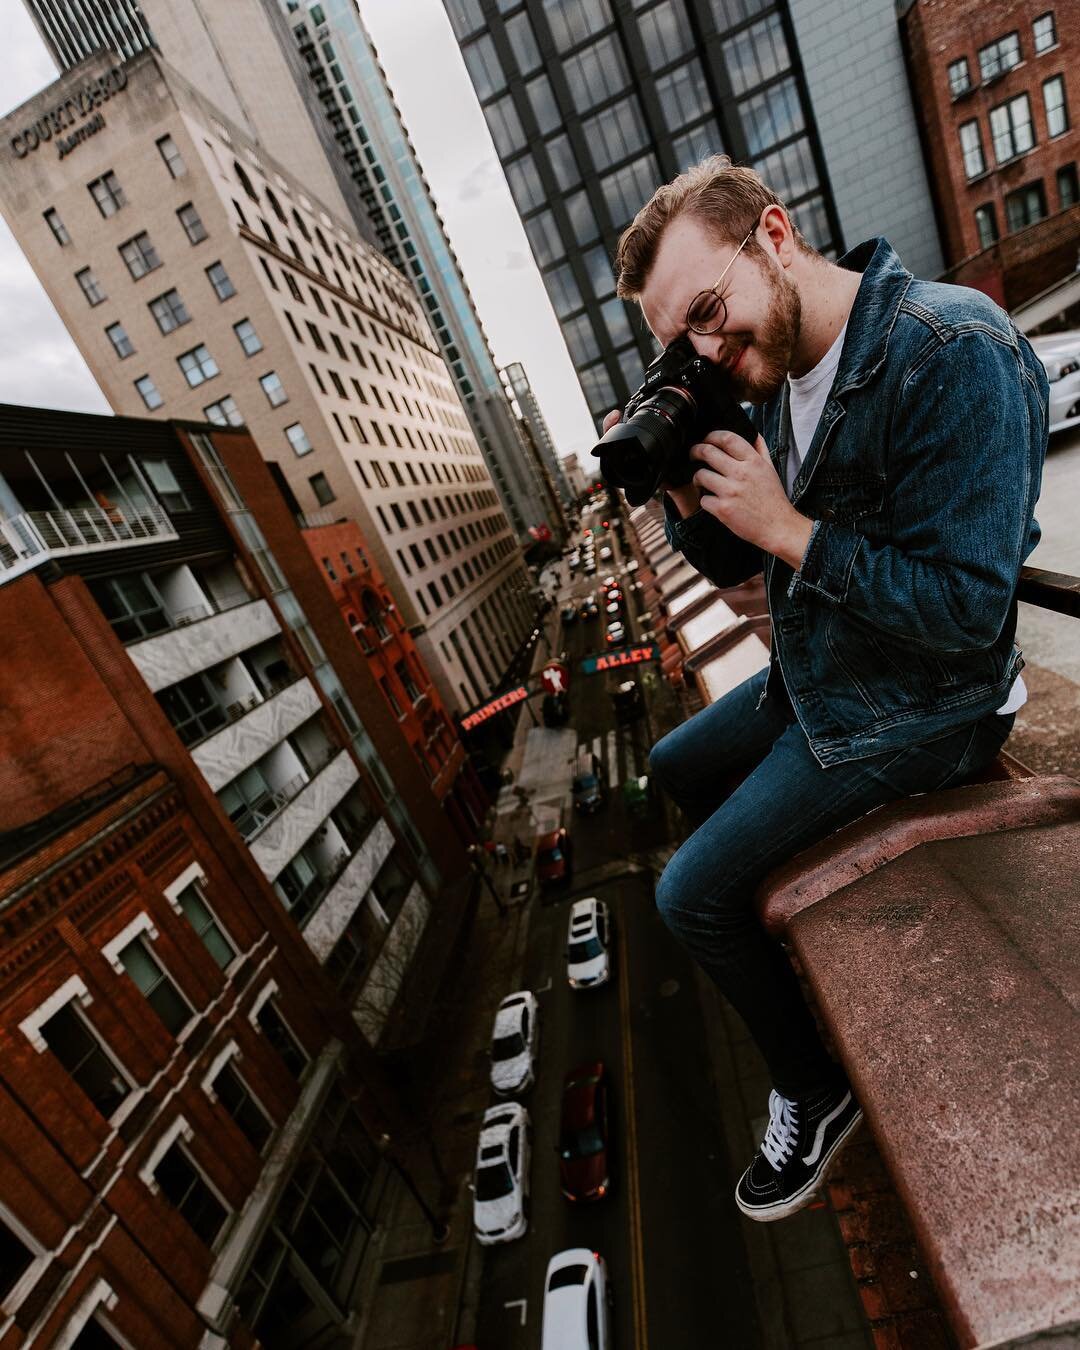 Does this make you nervous? 😏

Taking my photography to new heights in 2019 📸

Pc: @rkdeeb YOU ARE THE BOMB

#canon5dmarkiv #1635mm #lightroom #nashville #cityview #citylife #urbanphotography #agameoftones #artofvisuals #portraitphotography #street